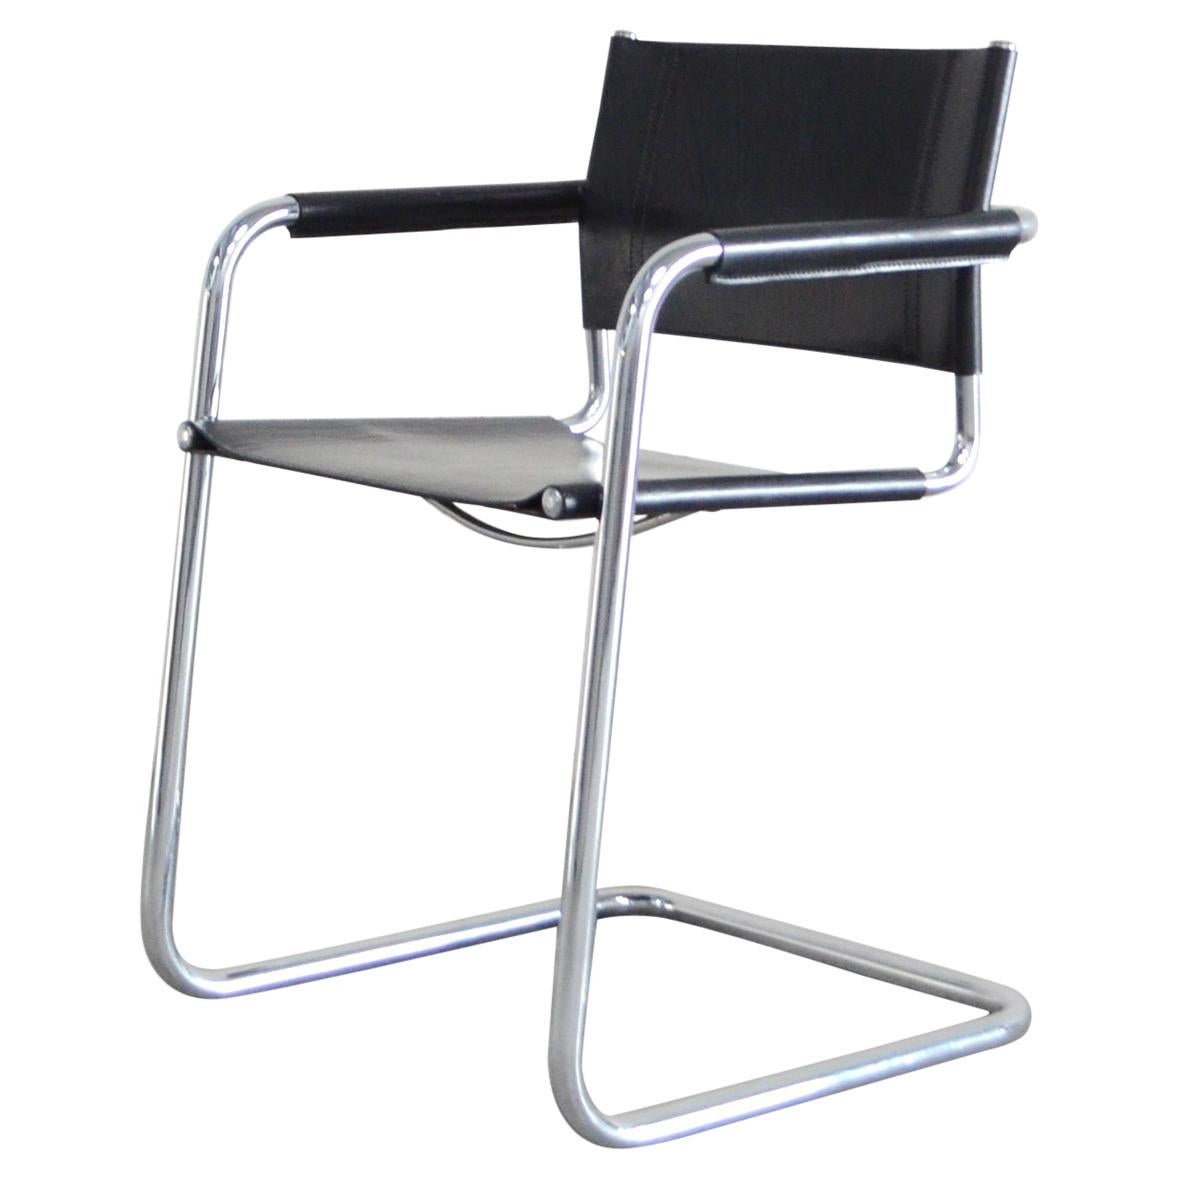 Linea Veam Cantilever Black Saddle Leather Chair